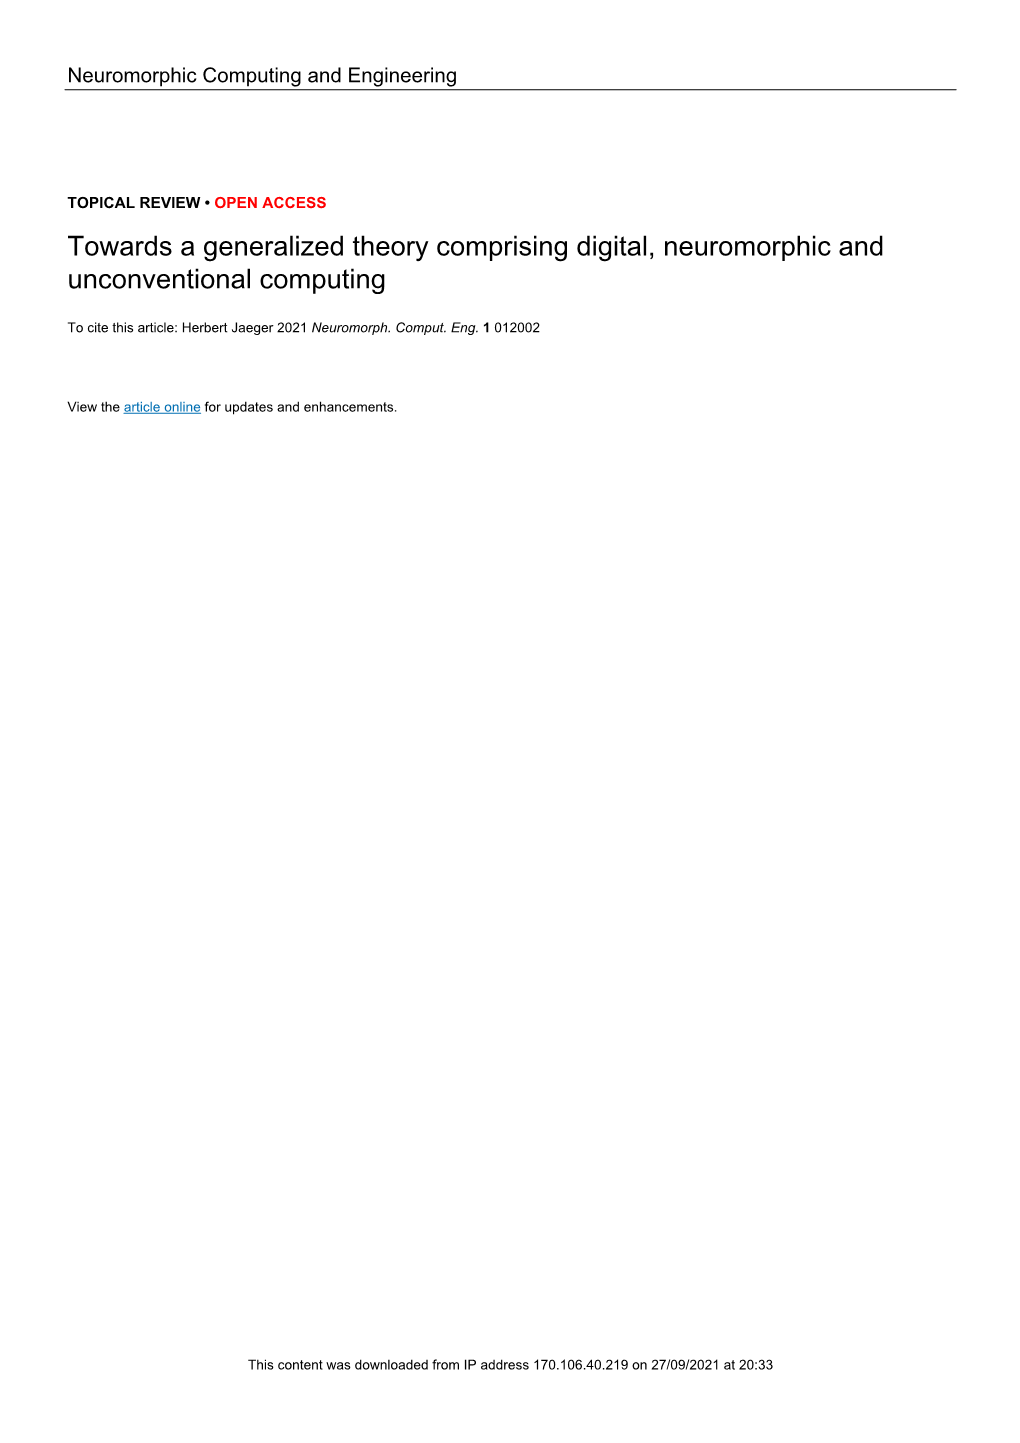 PDF, Towards a Generalized Theory Comprising Digital, Neuromorphic